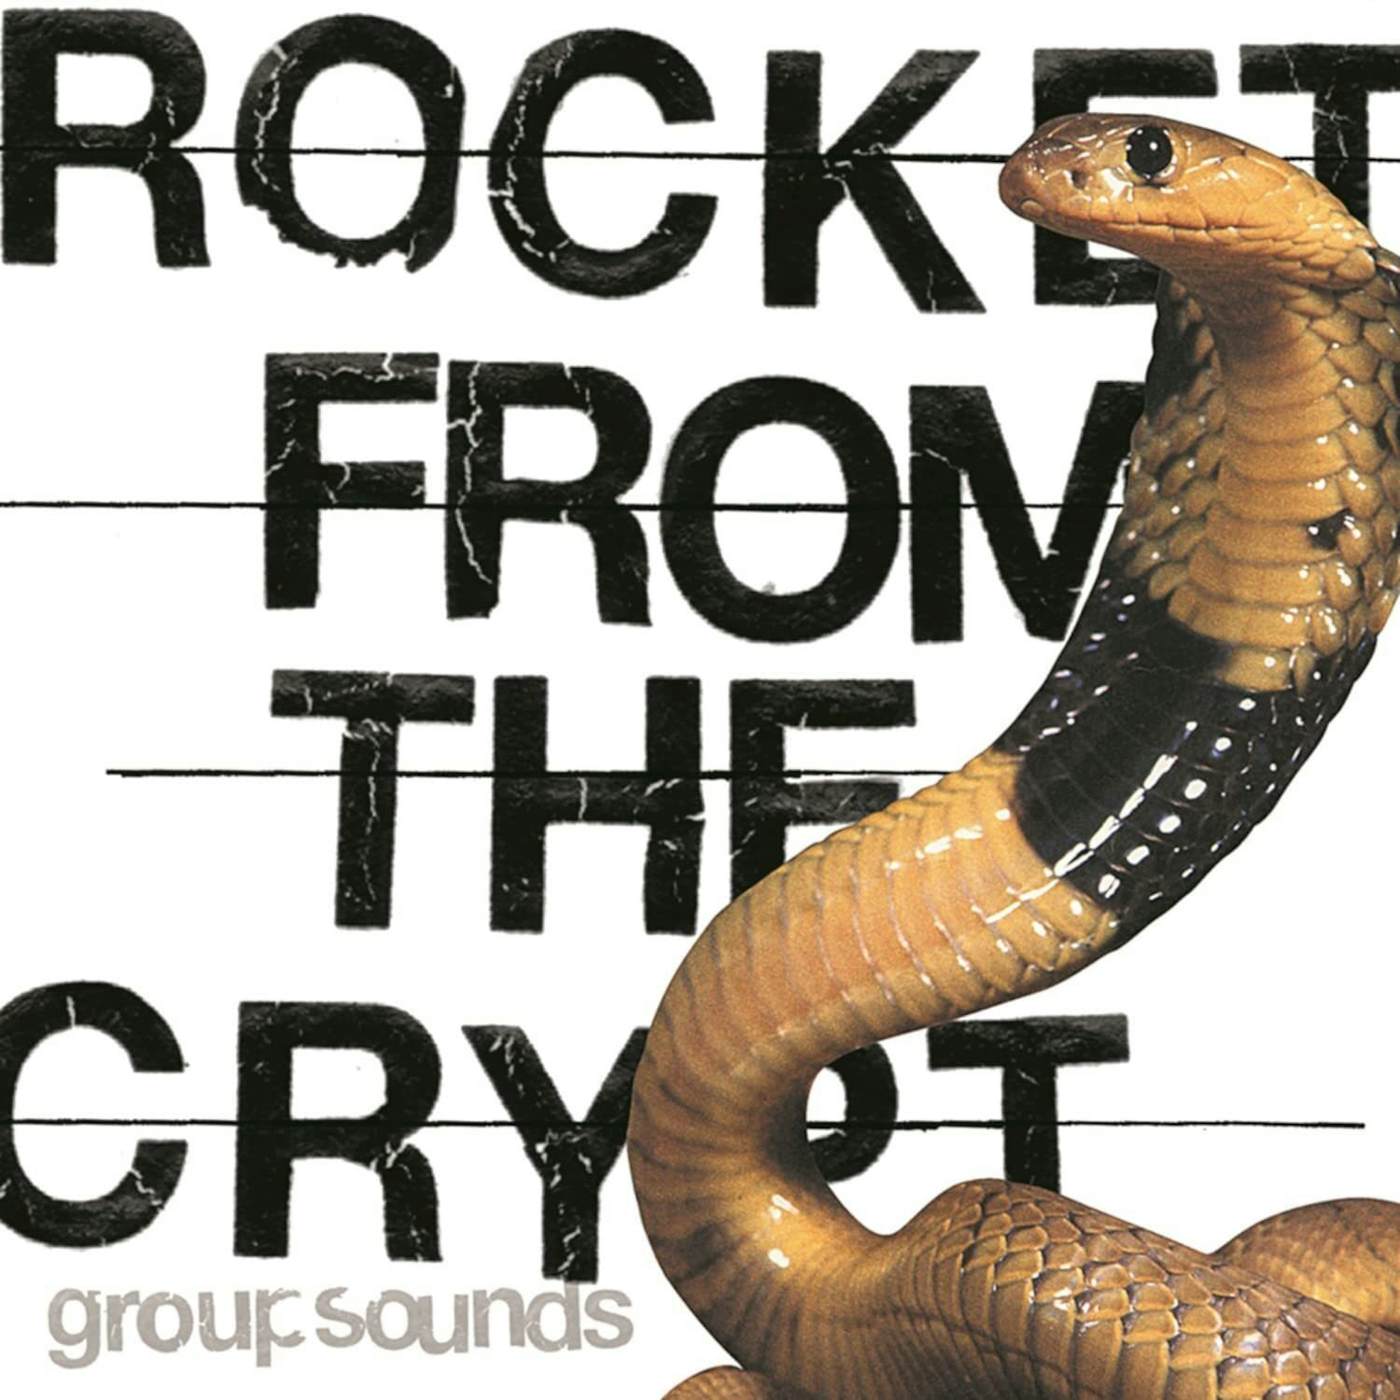 Rocket From The Crypt Group Sounds (Limited Edition) Vinyl Record